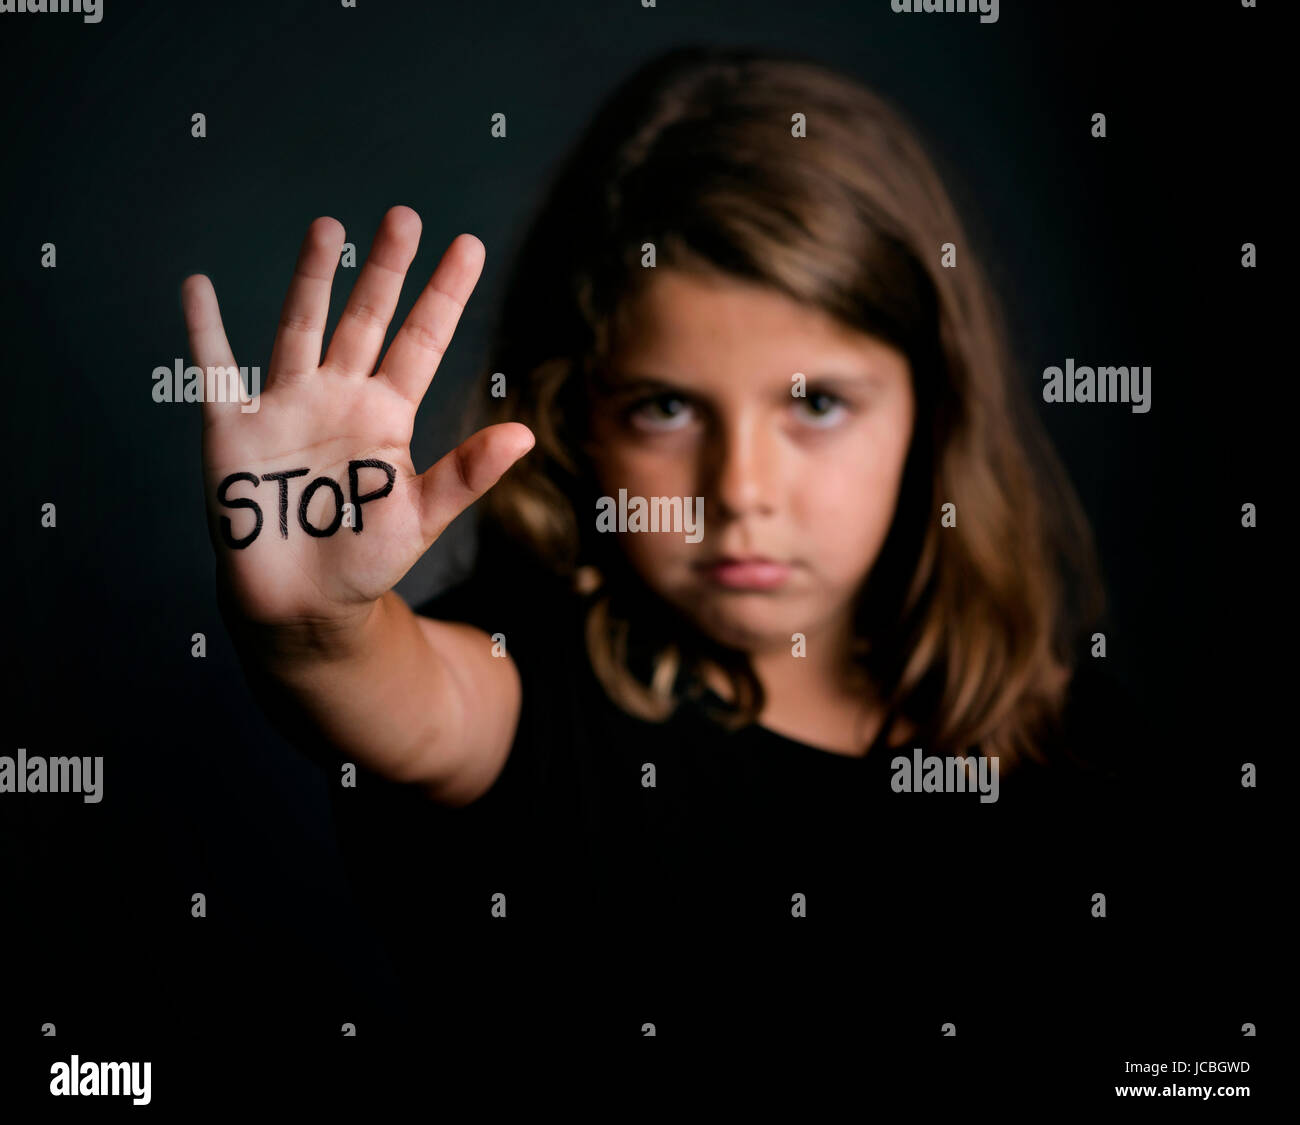 Angry girl, showing hand signaling to stop violence Stock Photo